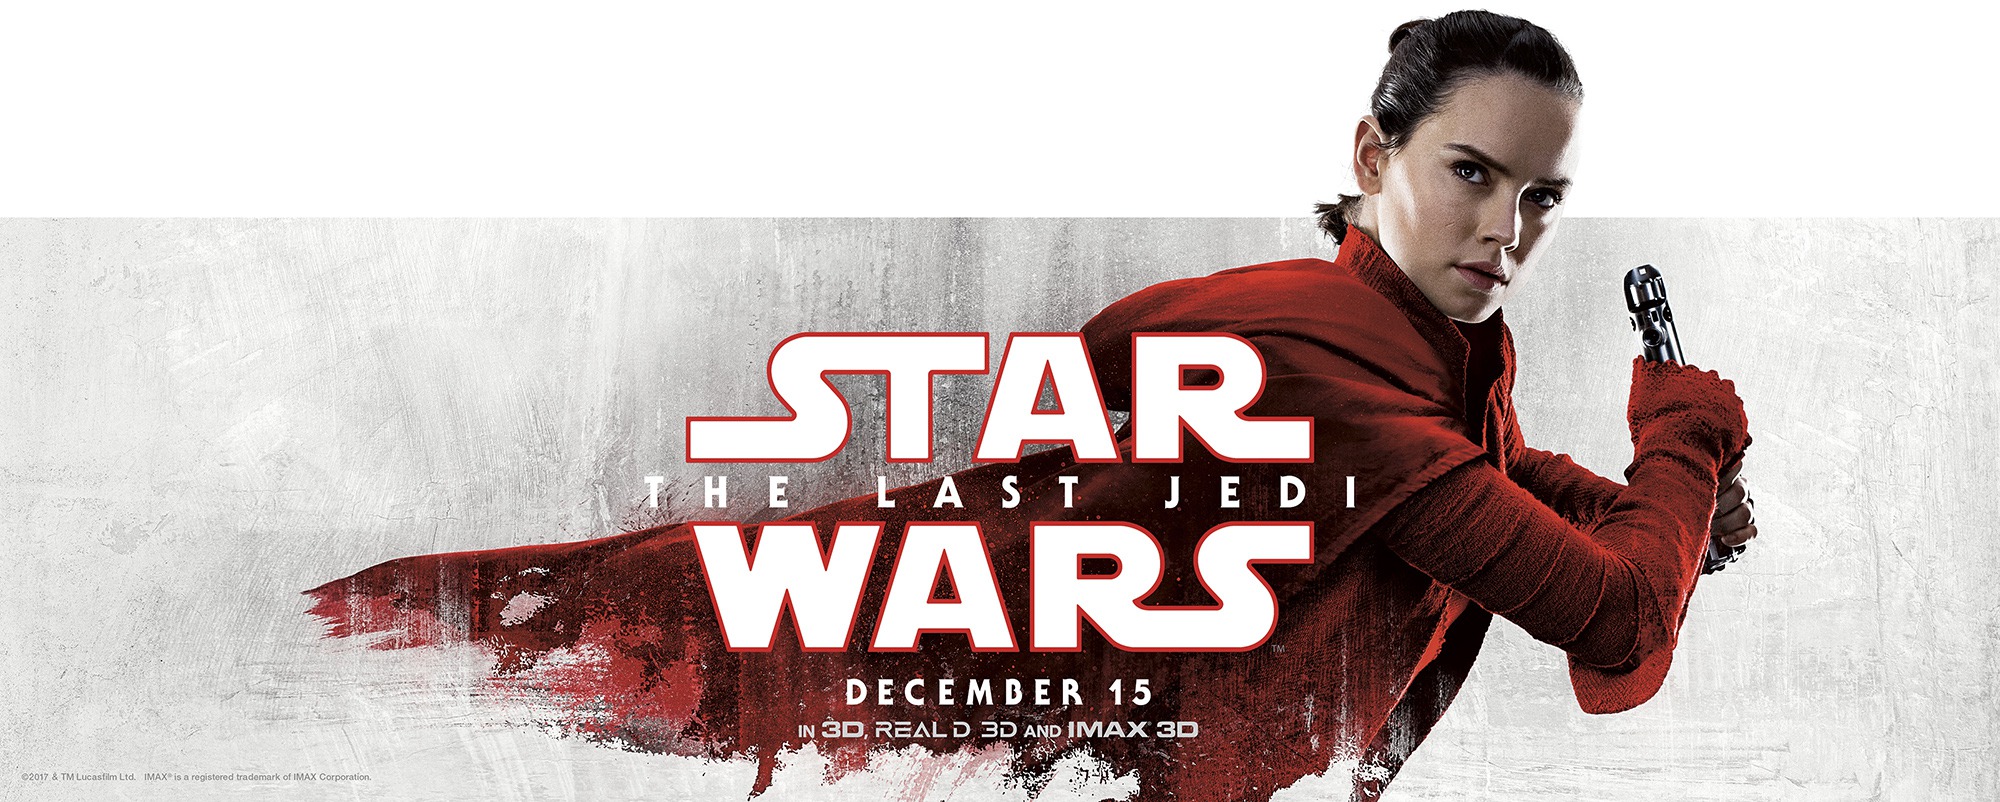 Mega Sized Movie Poster Image for Star Wars: The Last Jedi (#67 of 67)